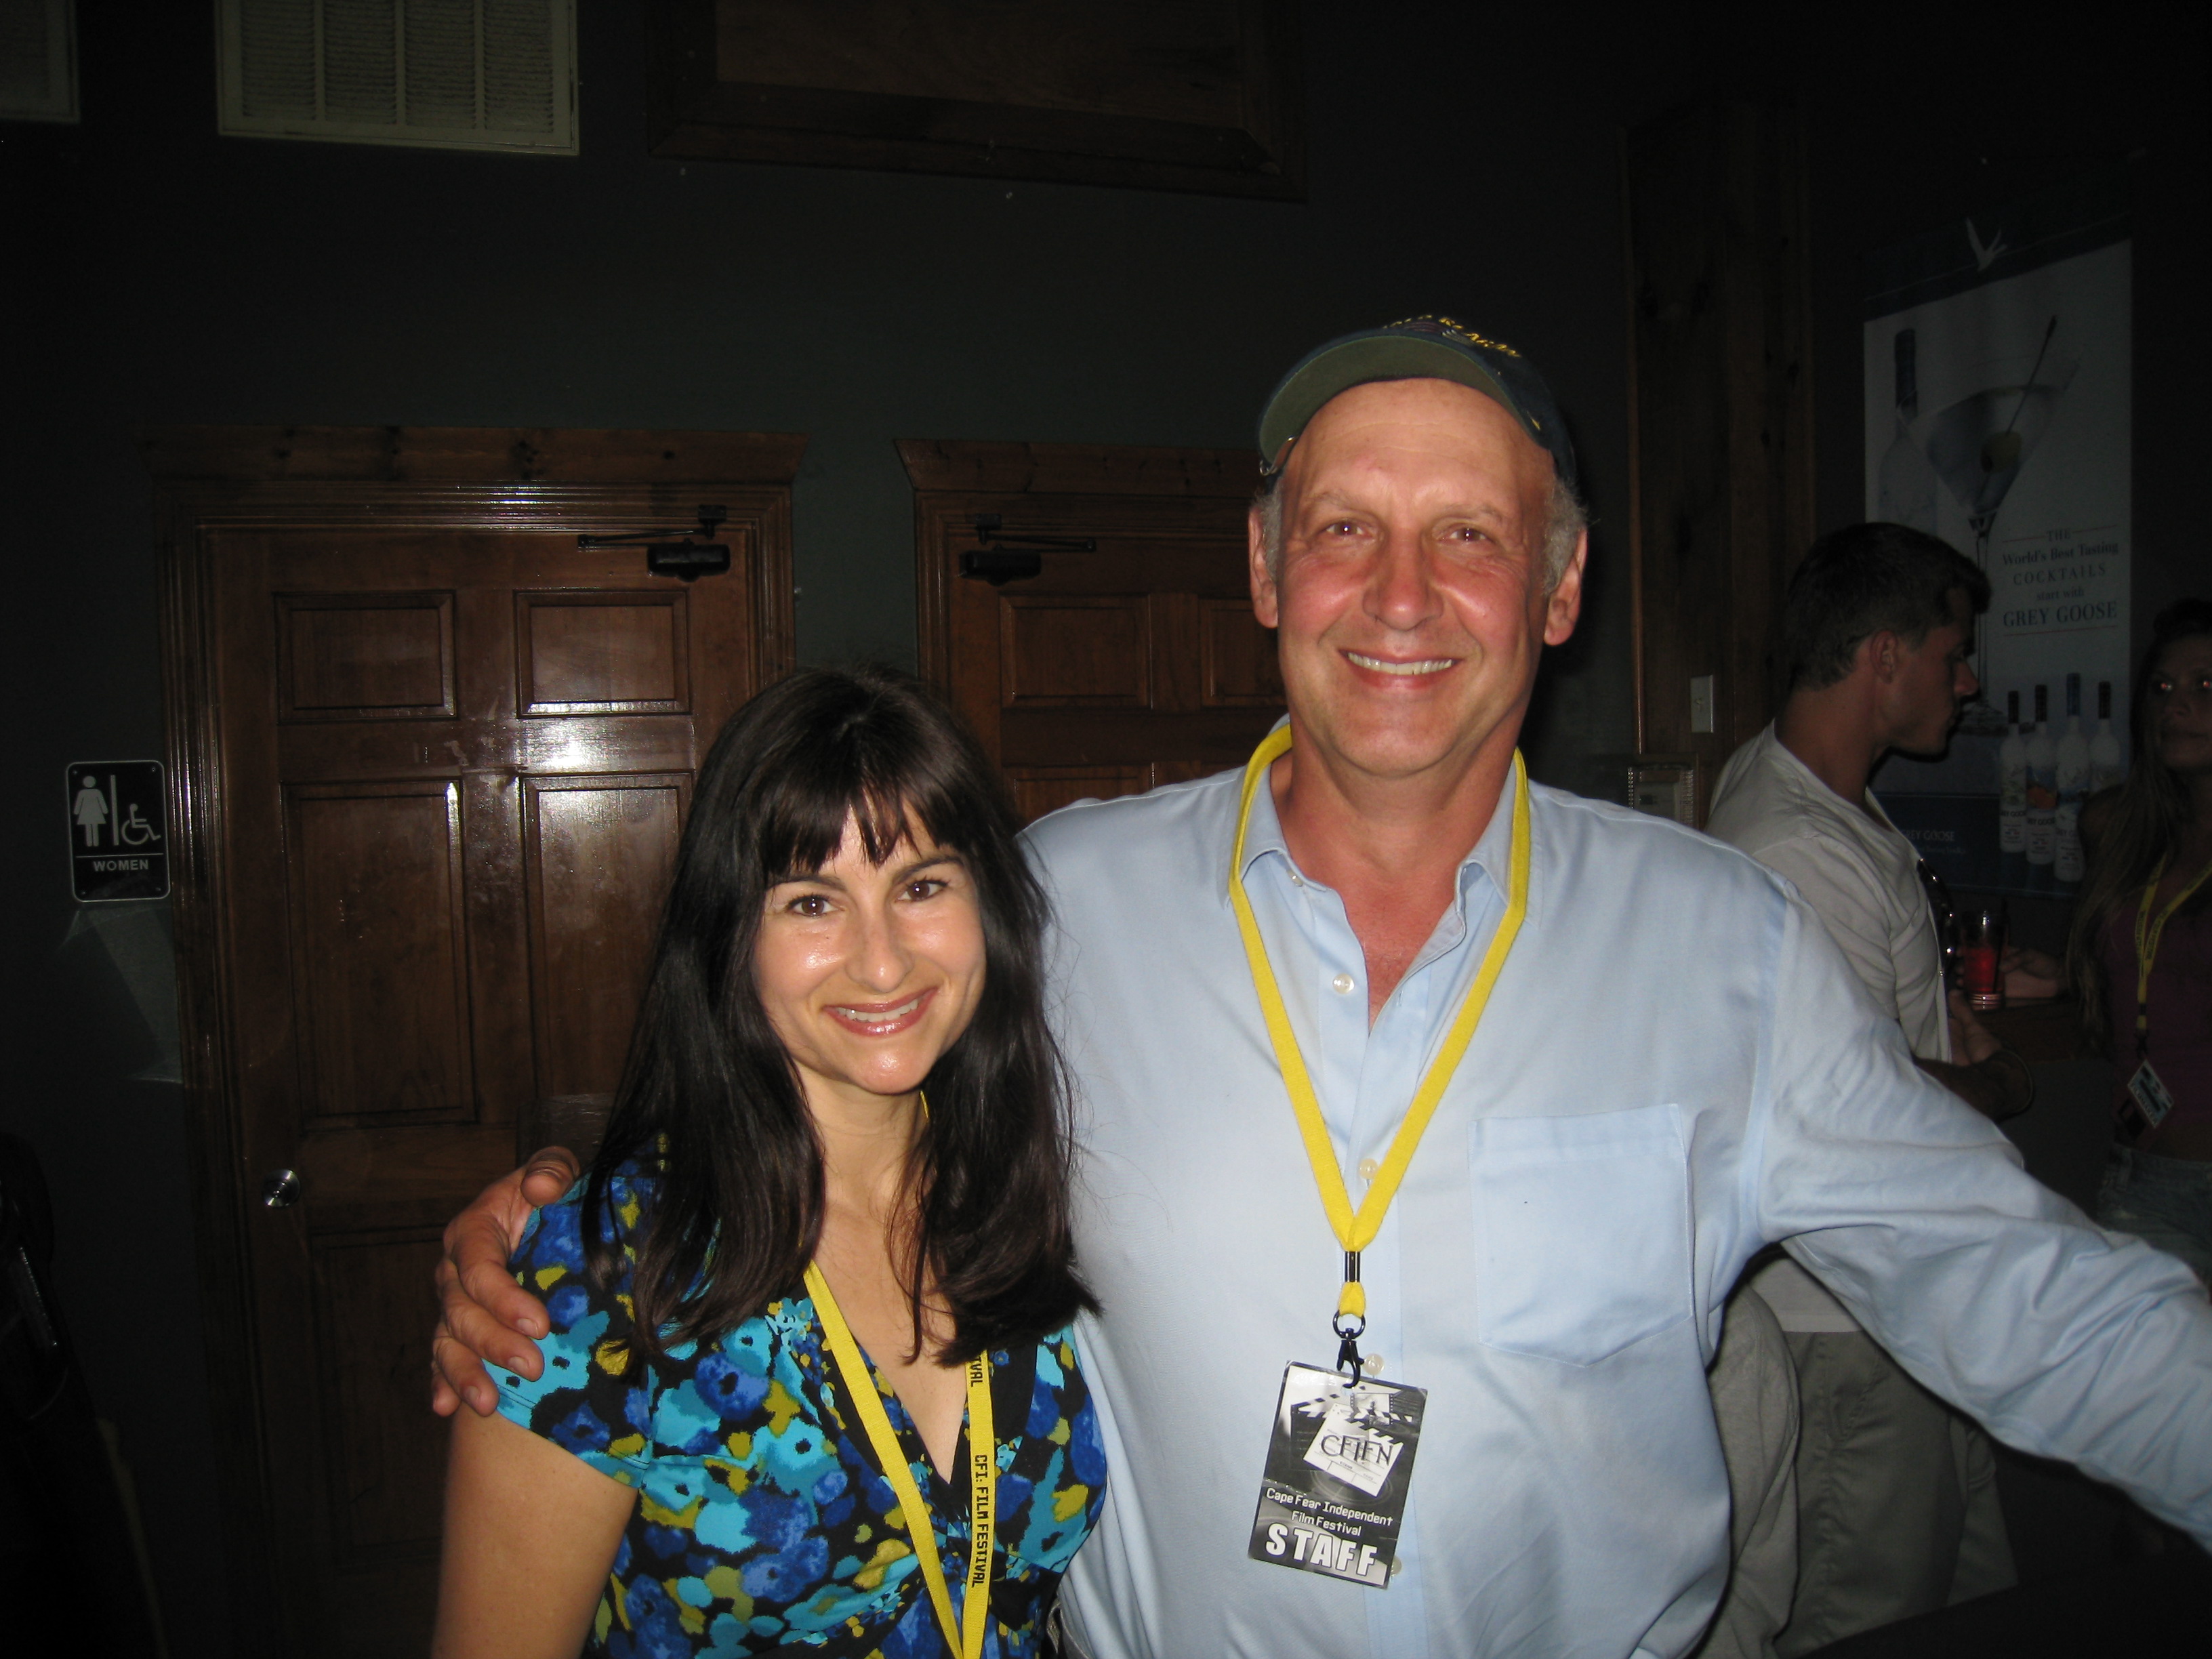 Vickie Hannah & Nick Searcy at the Cape Fear Independent Film Festival